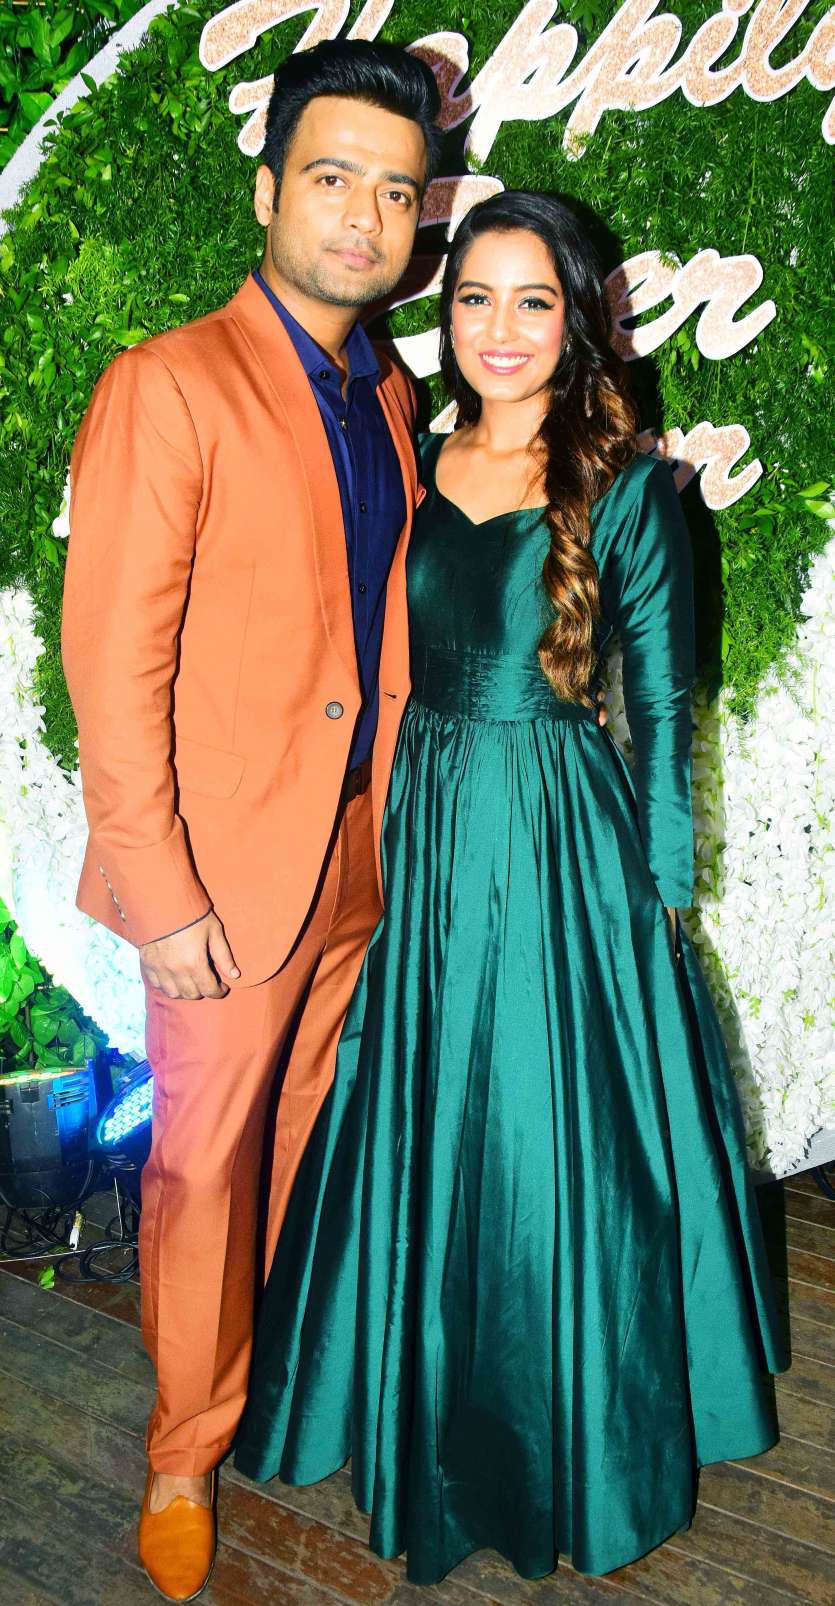 Rubina's closest friend Srishty Rode also became a part of the celebration looking sizzling hot in a green gown.